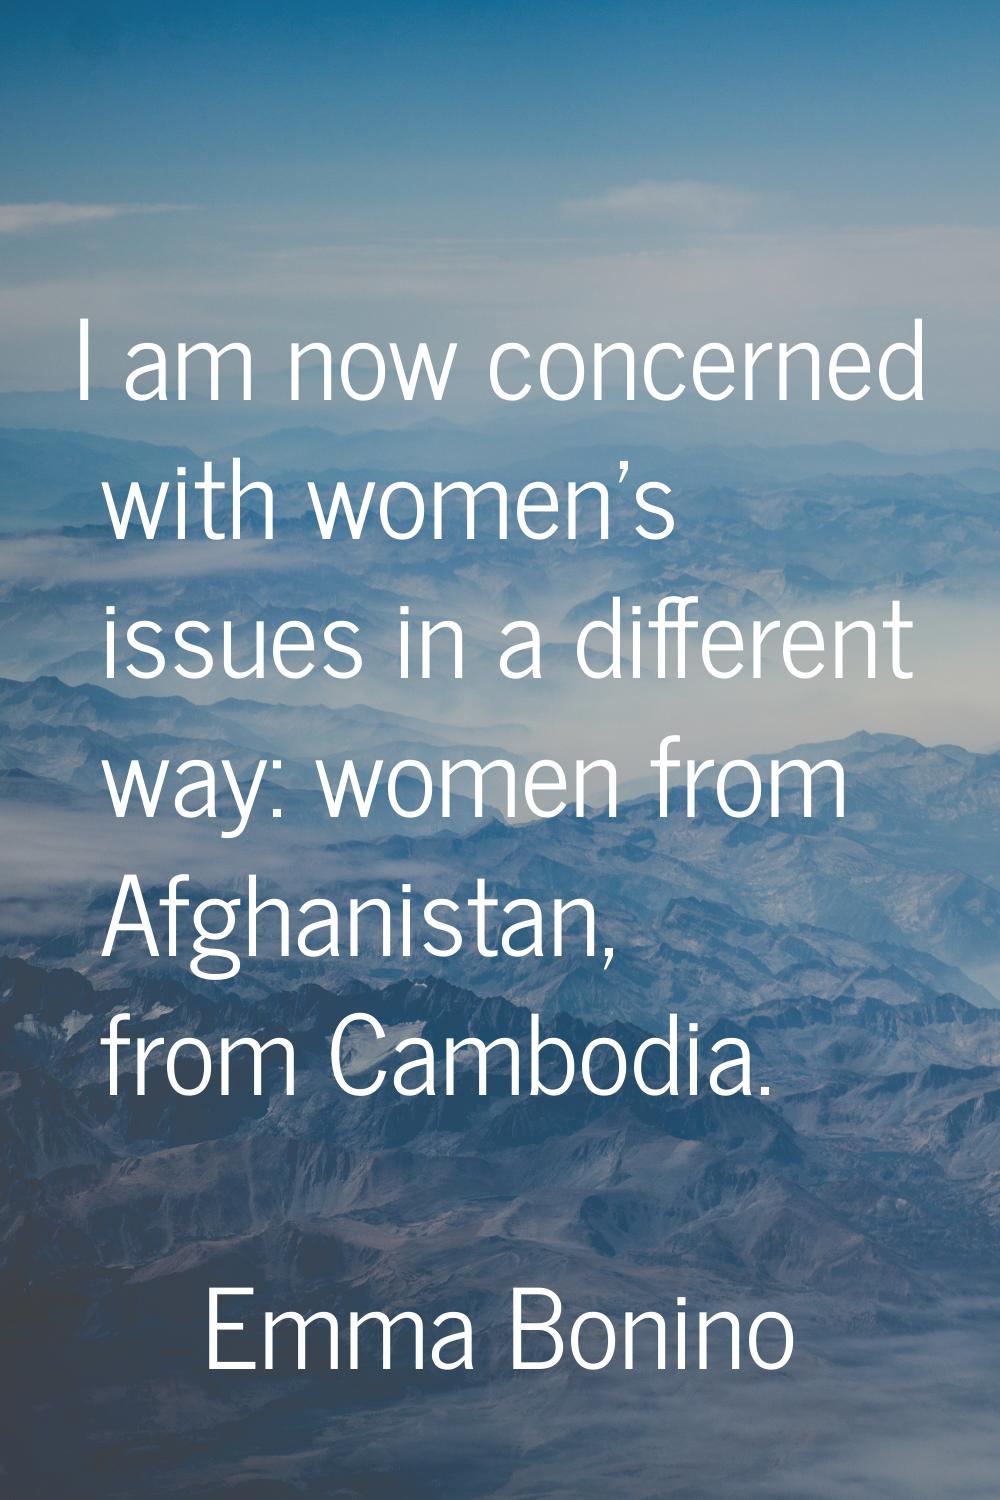 I am now concerned with women's issues in a different way: women from Afghanistan, from Cambodia.